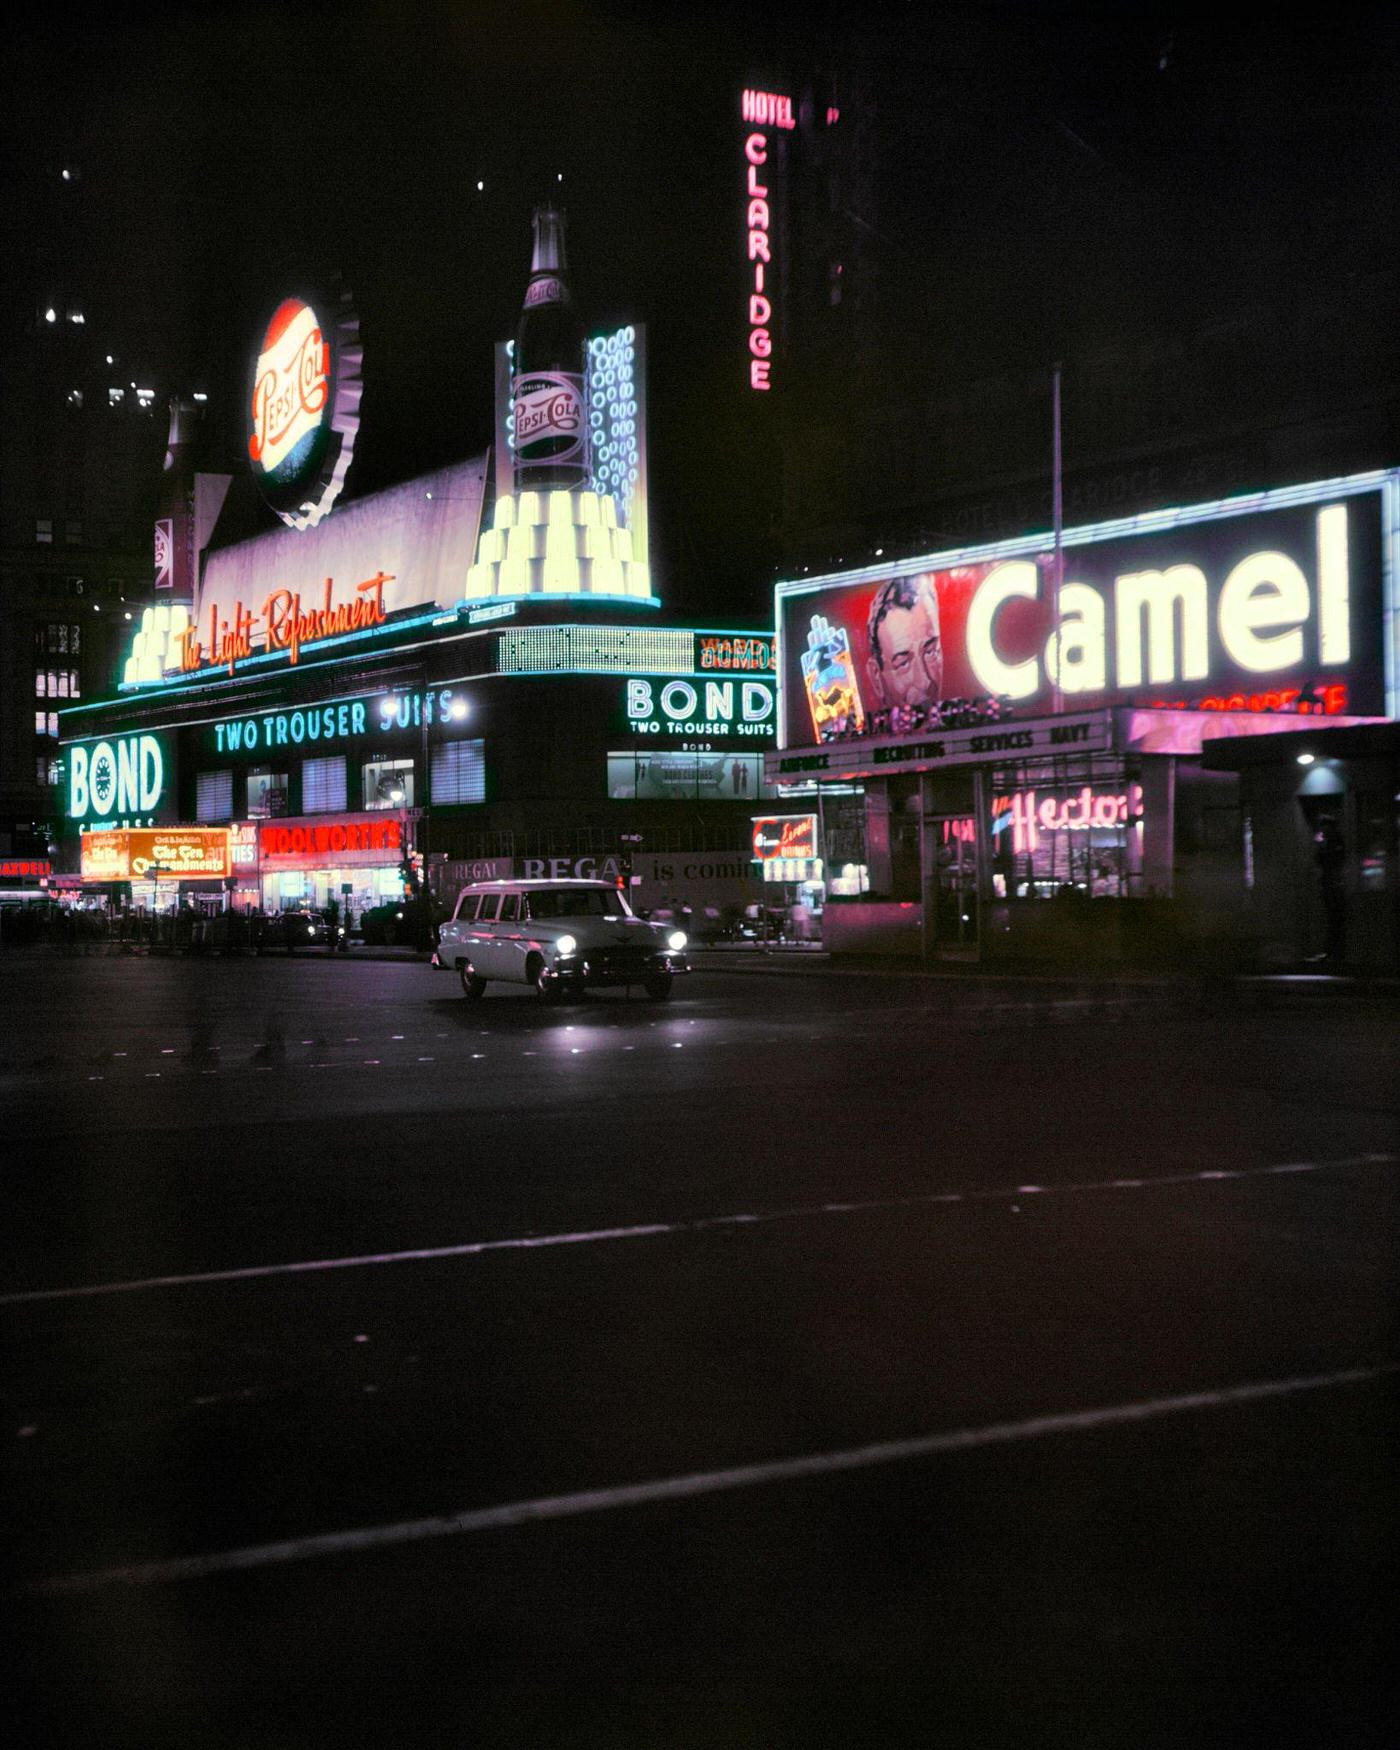 Night Times Square, Neon Signs And Ads, Manhattan, 1956.